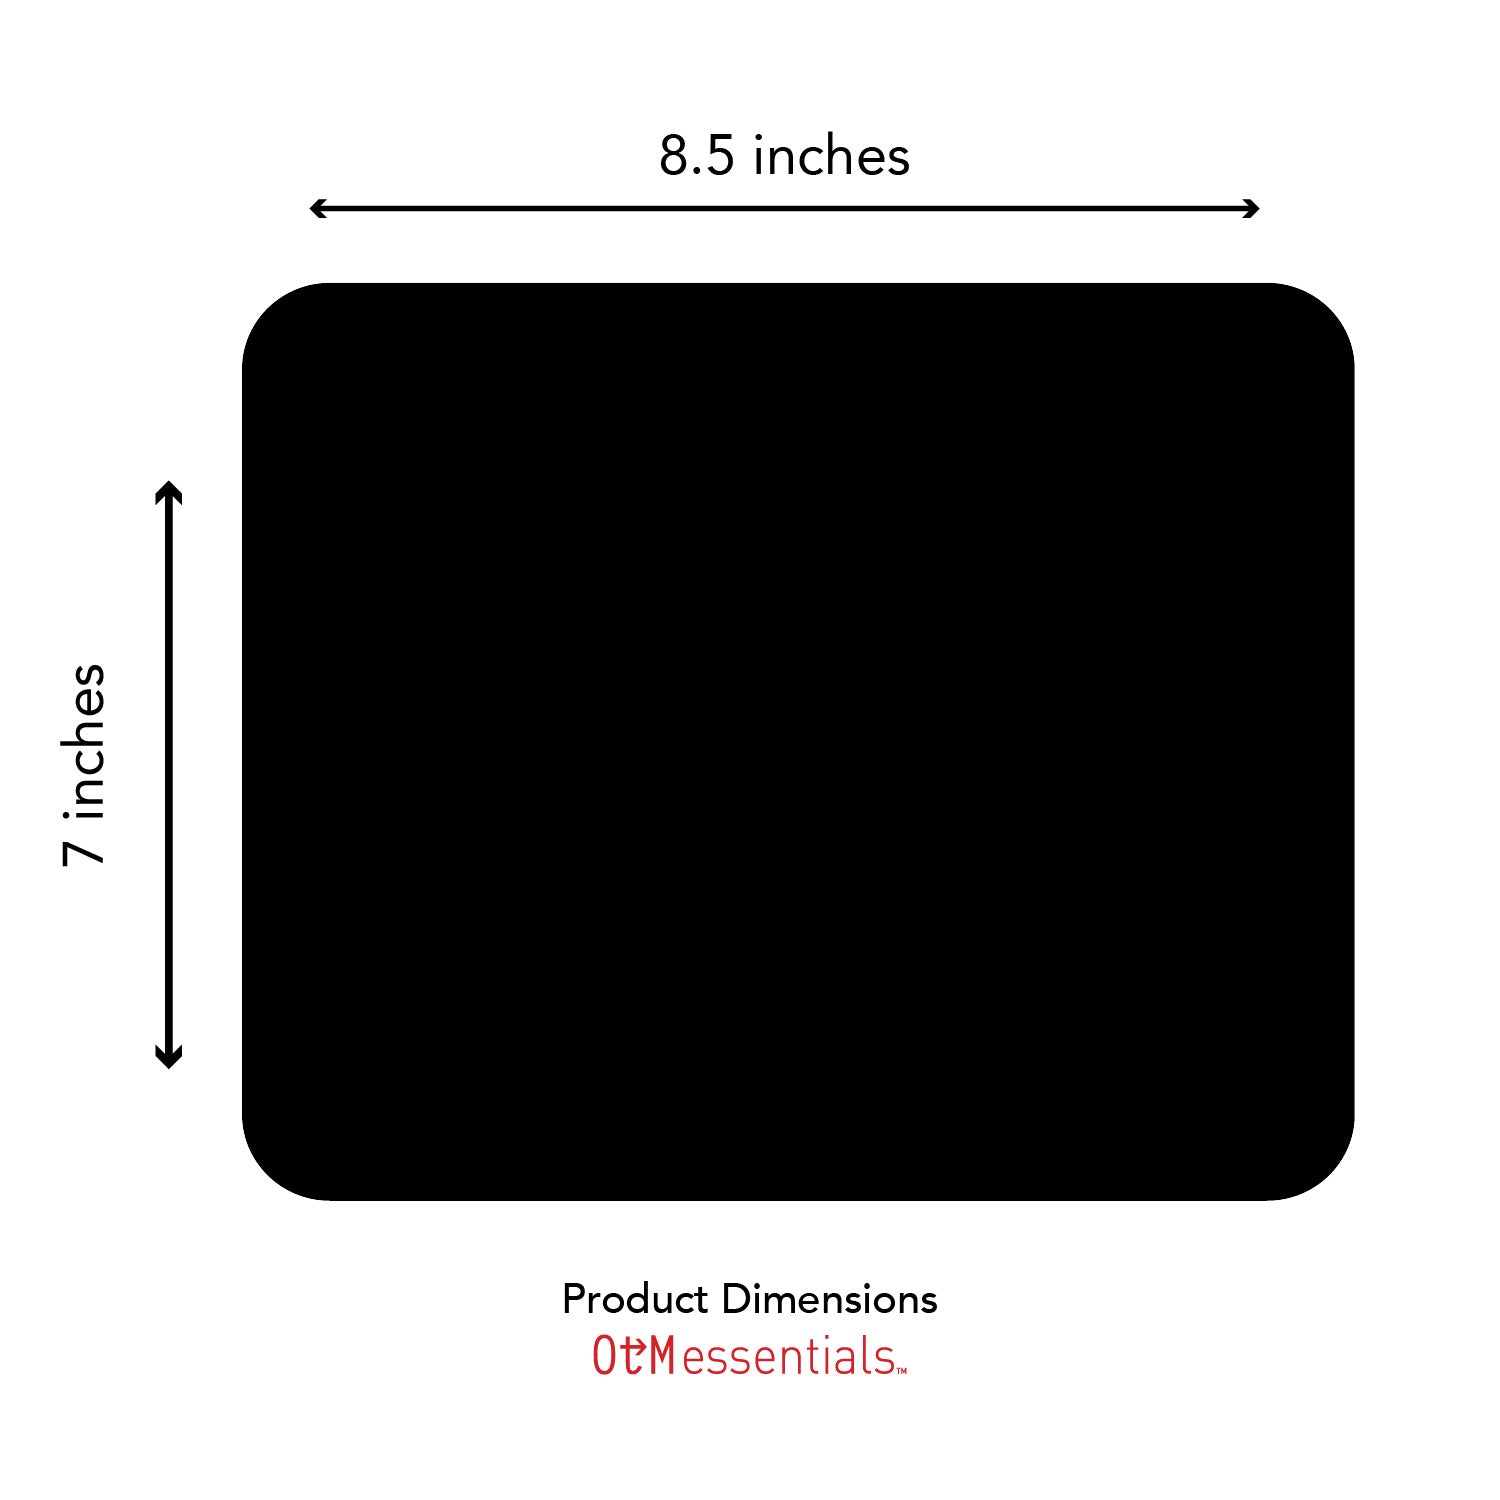 OC-UOF-MH38A, Product Dimensions